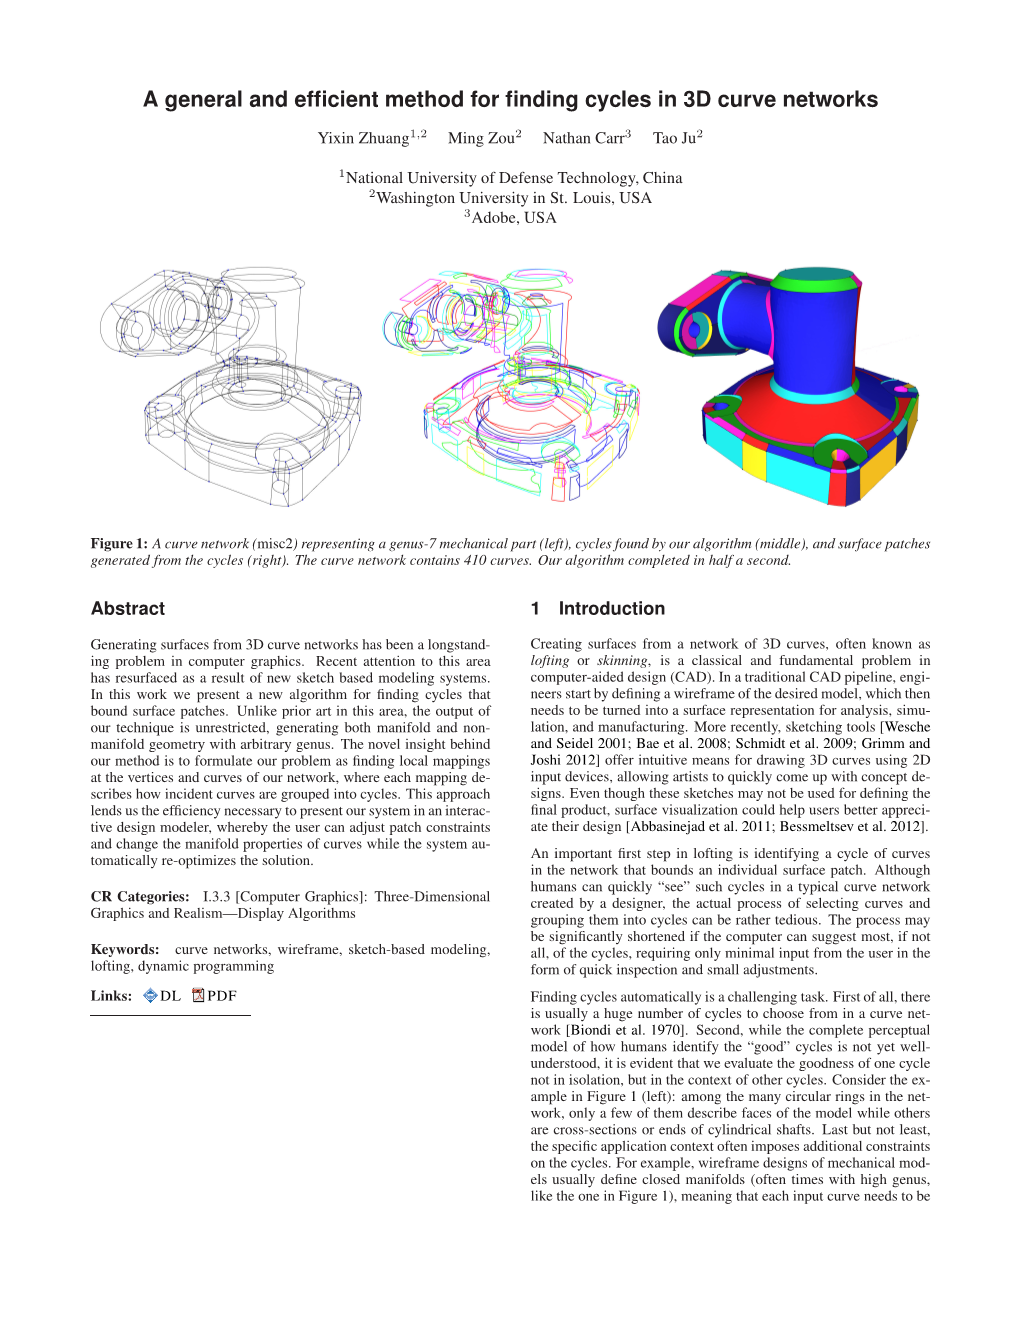 A General and Efficient Method for Finding Cycles in 3D Curve Networks